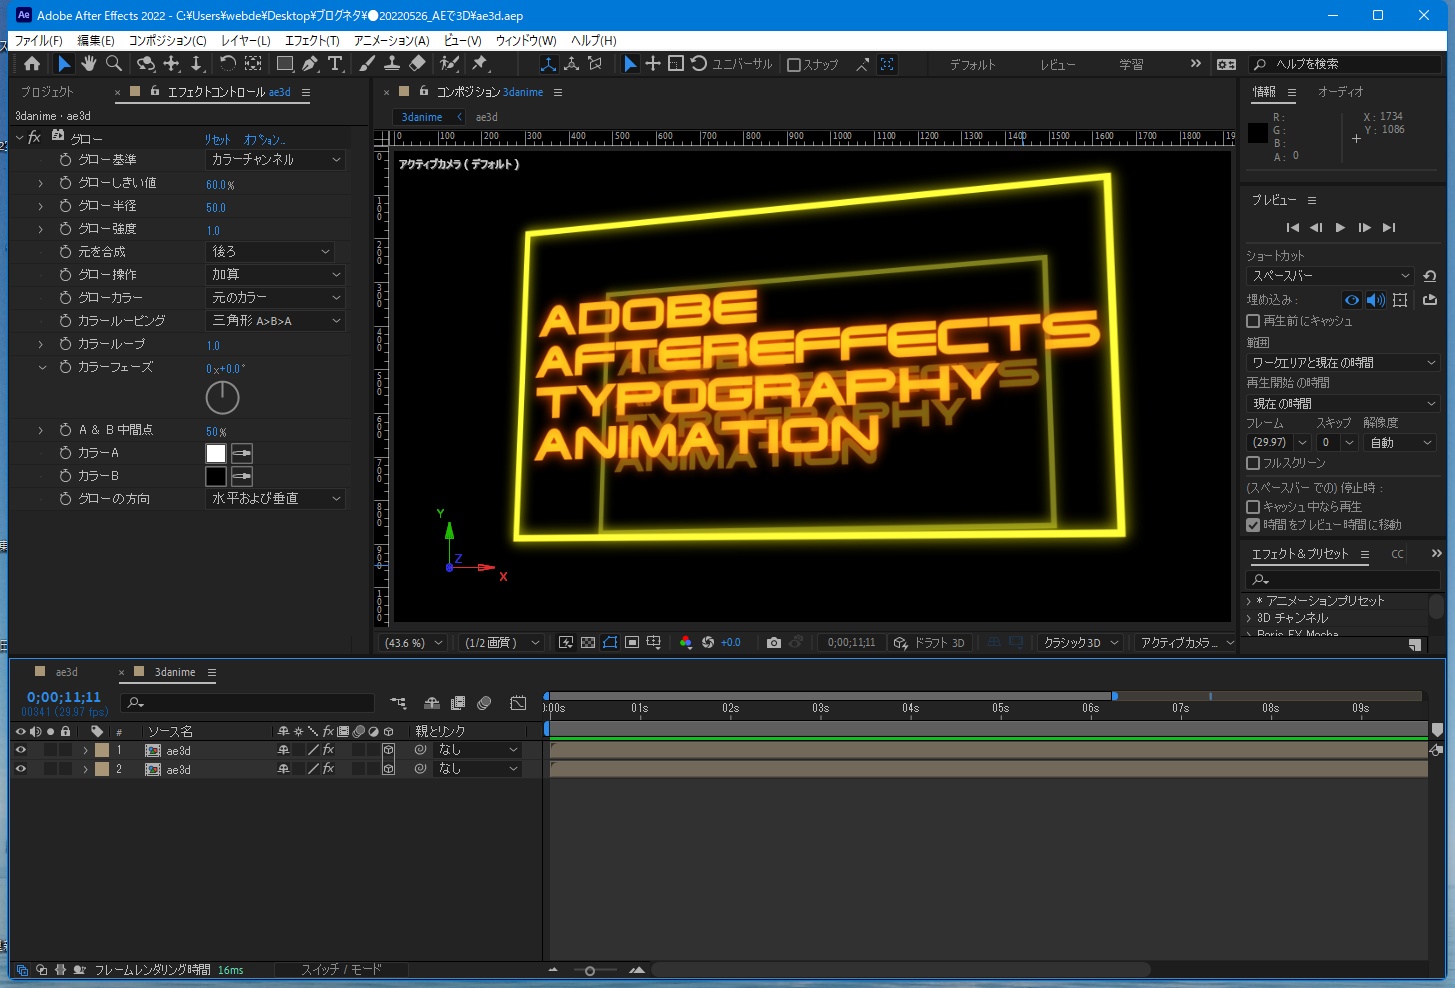 Adobe AfterEffects で3Dタイポグラフィアニメ